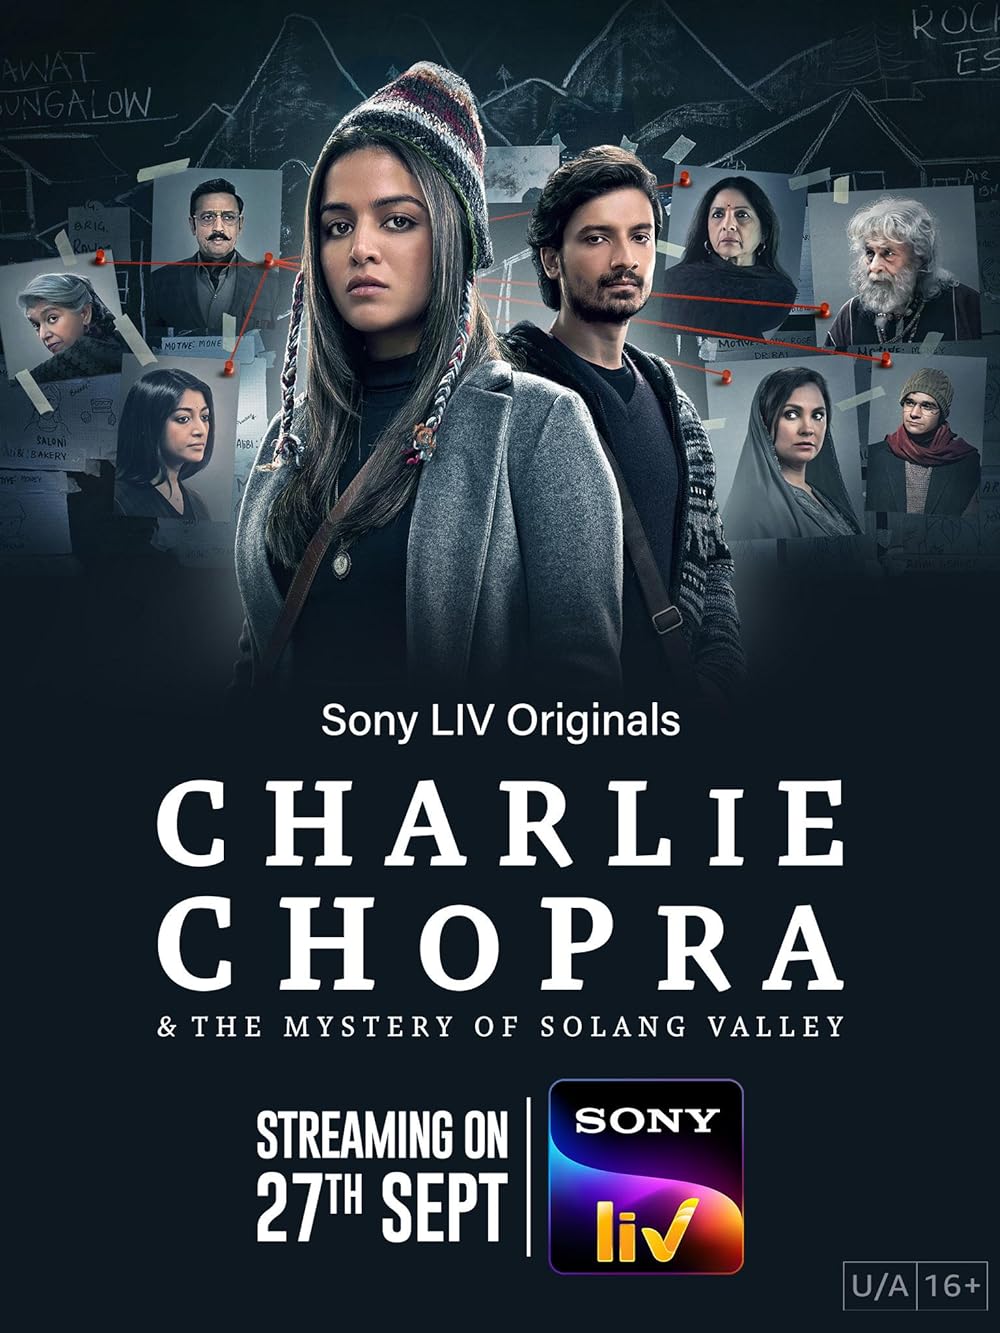 Download Charlie Chopra & The Mystery Of Solang Valley Season 01 WEB-DL Hindi Sonylive Web Series 1080p | 720p | 480p [1.0GB] download